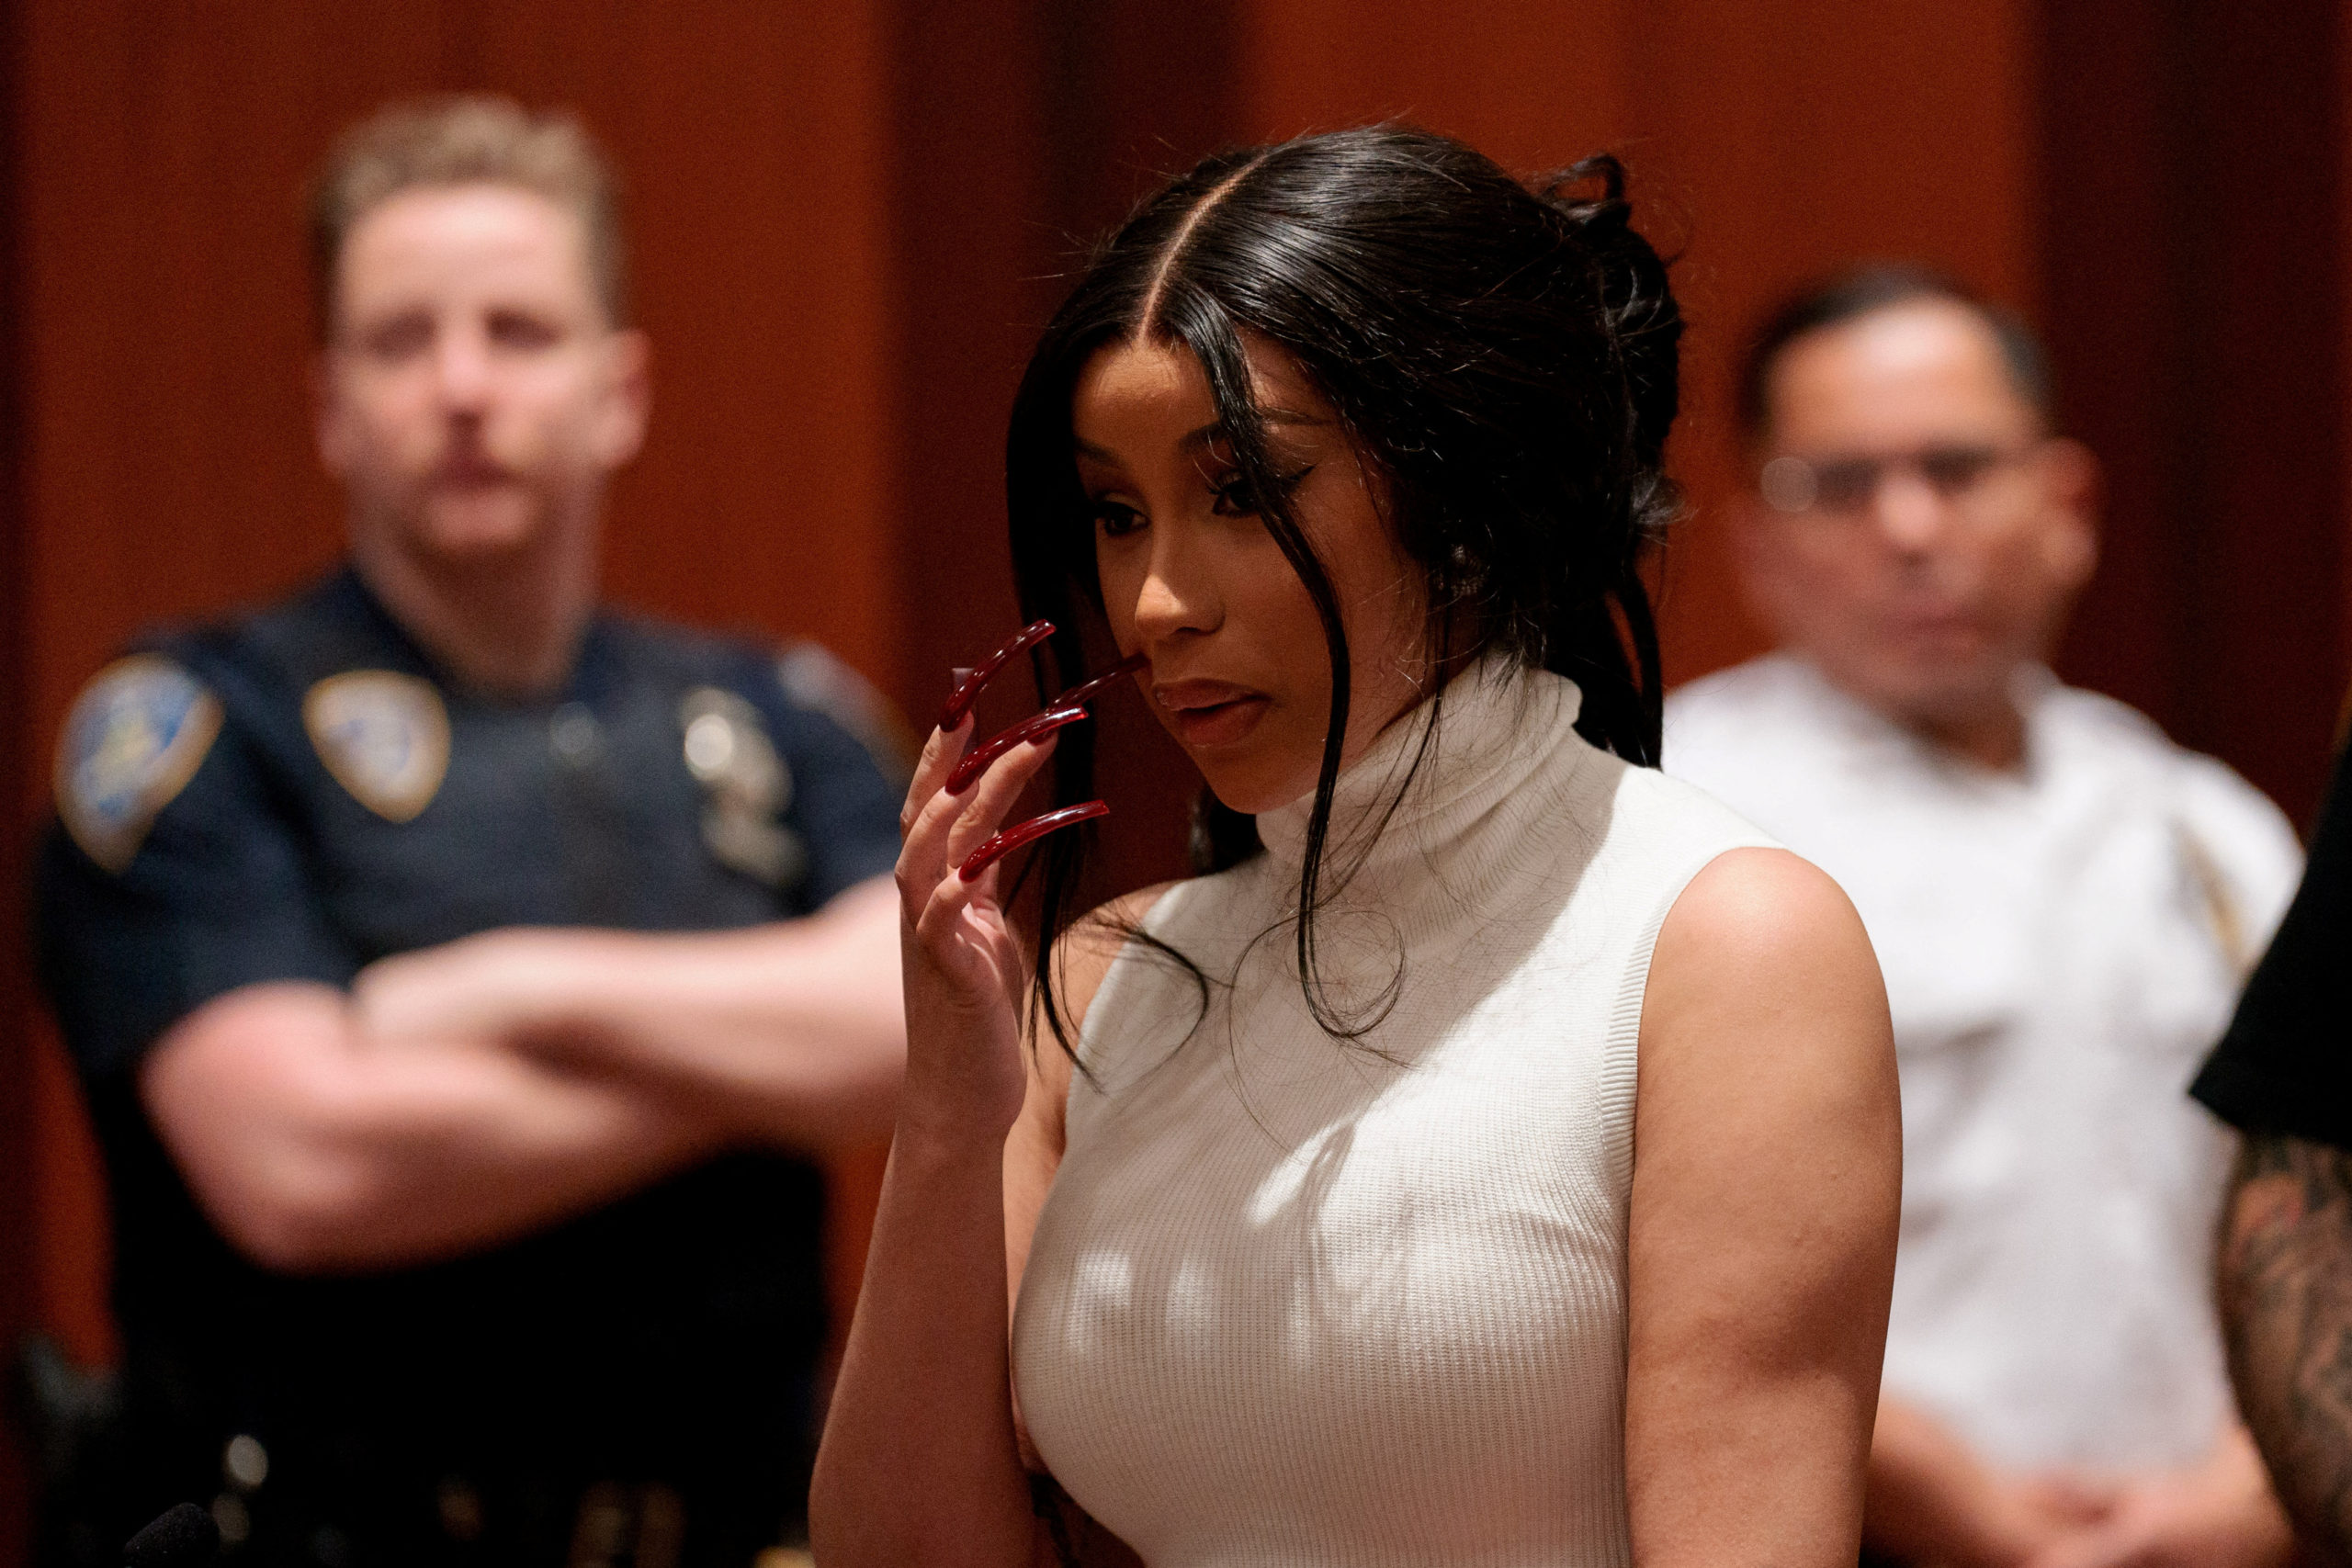 Grammy Award-winning rapper Cardi B has until March 1 to complete 15 days of mandatory community service